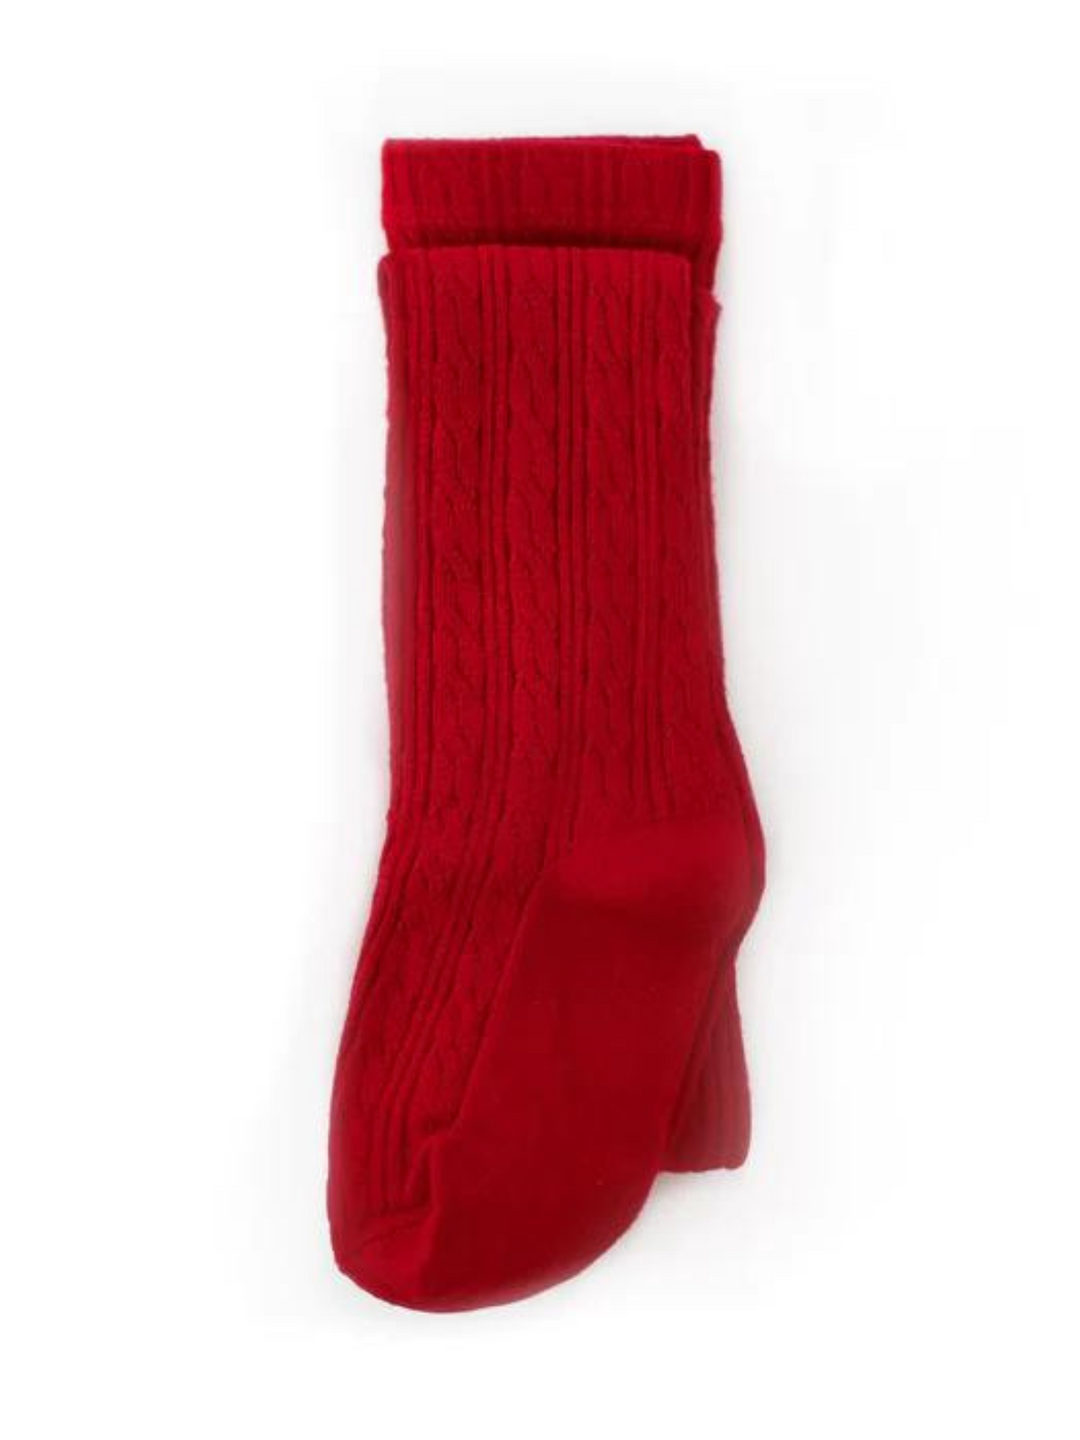 Cherry Cable Knit Tights | Little Stocking Co.